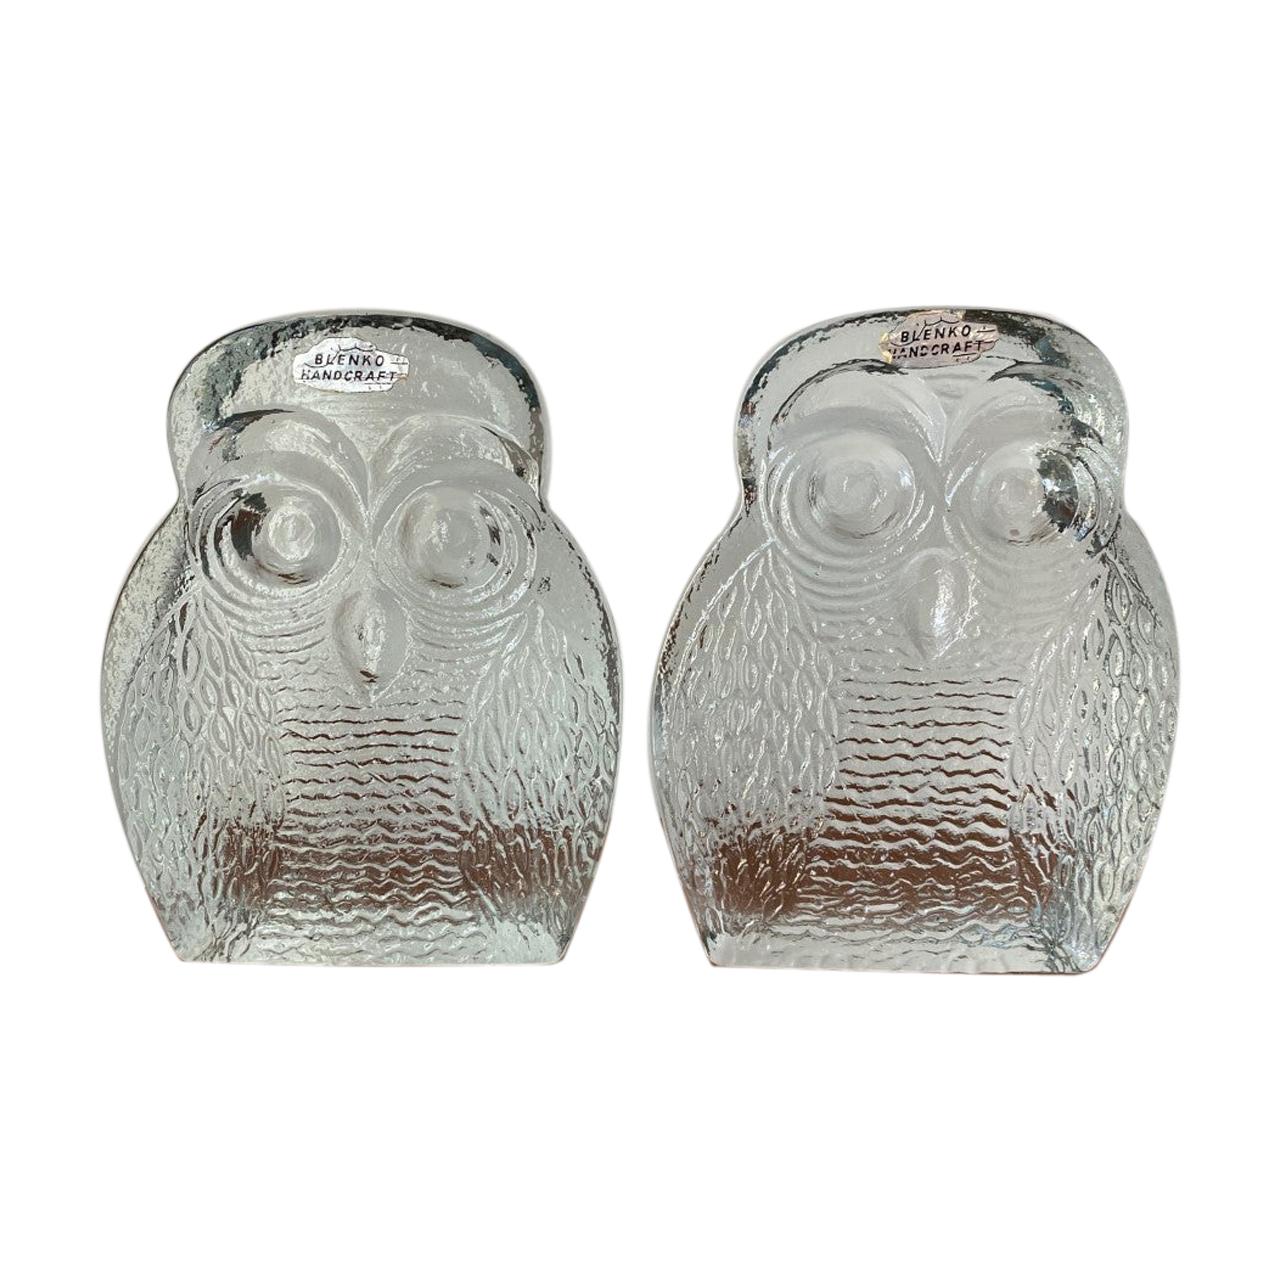 Vintage Midcentury Glass Owl Bookends by Blenko